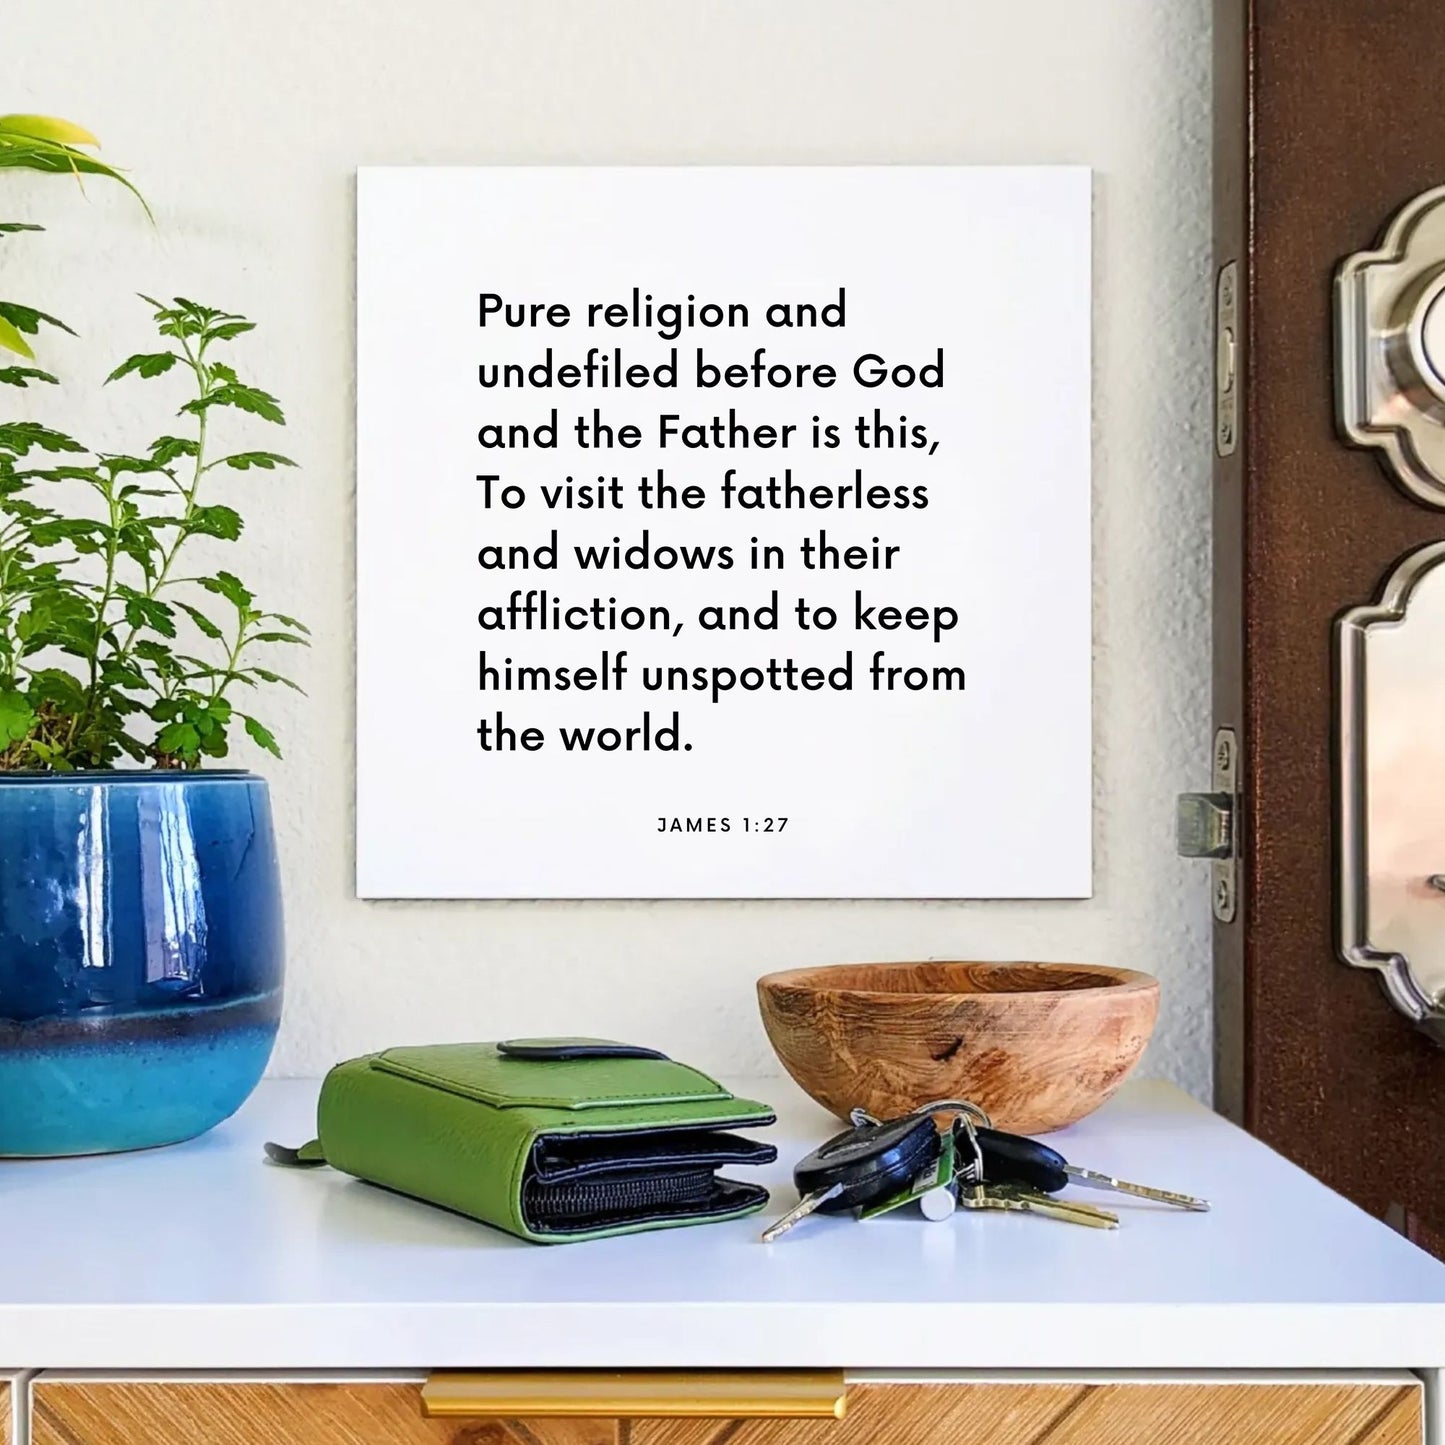 Entryway mouting of the scripture tile for James 1:27 - "Pure religion is this: to visit the fatherless and widows"